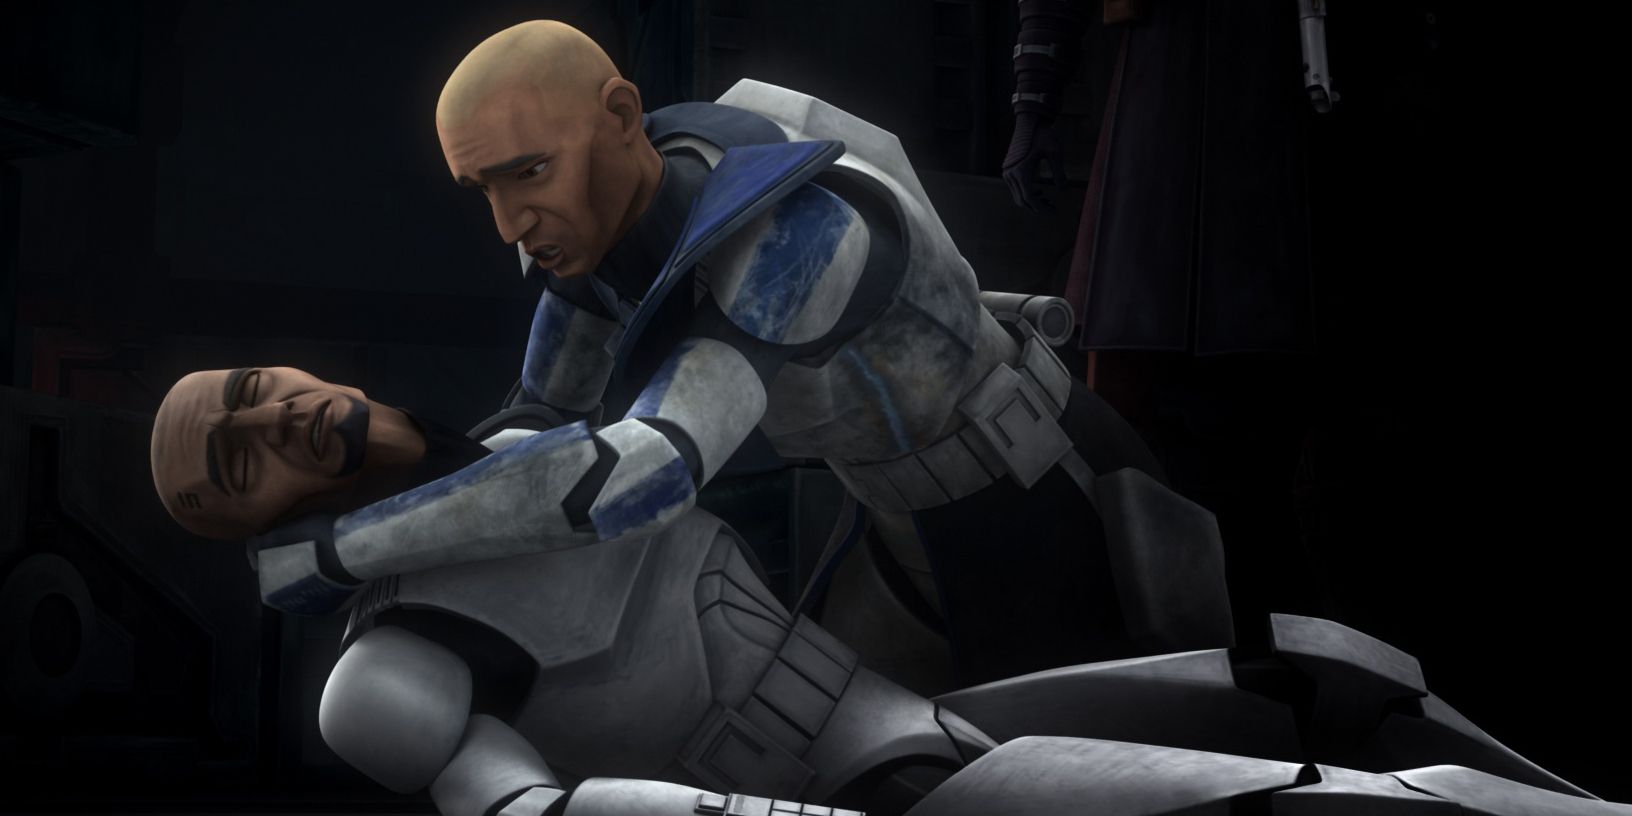 Clonetrooper Fives dying while being held in Rex's arms.